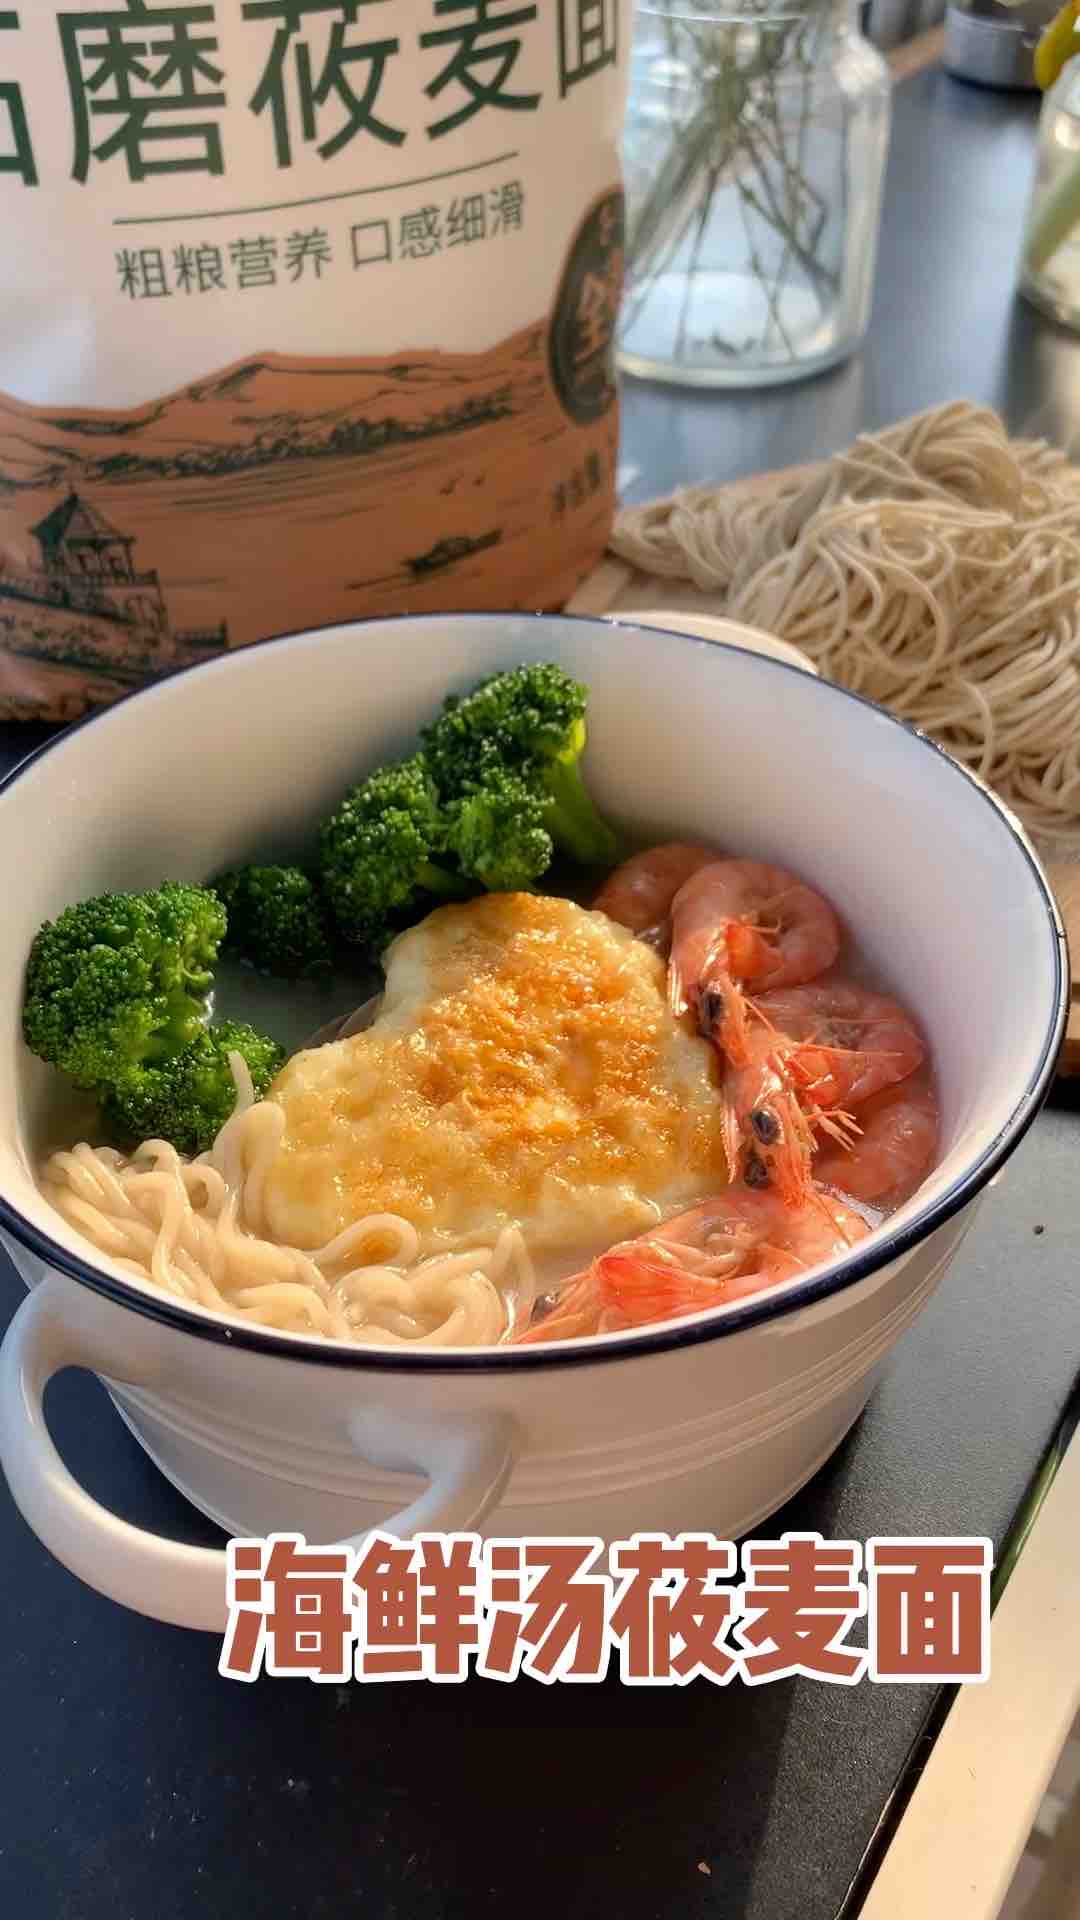 Naked Oat Noodles in Seafood Soup